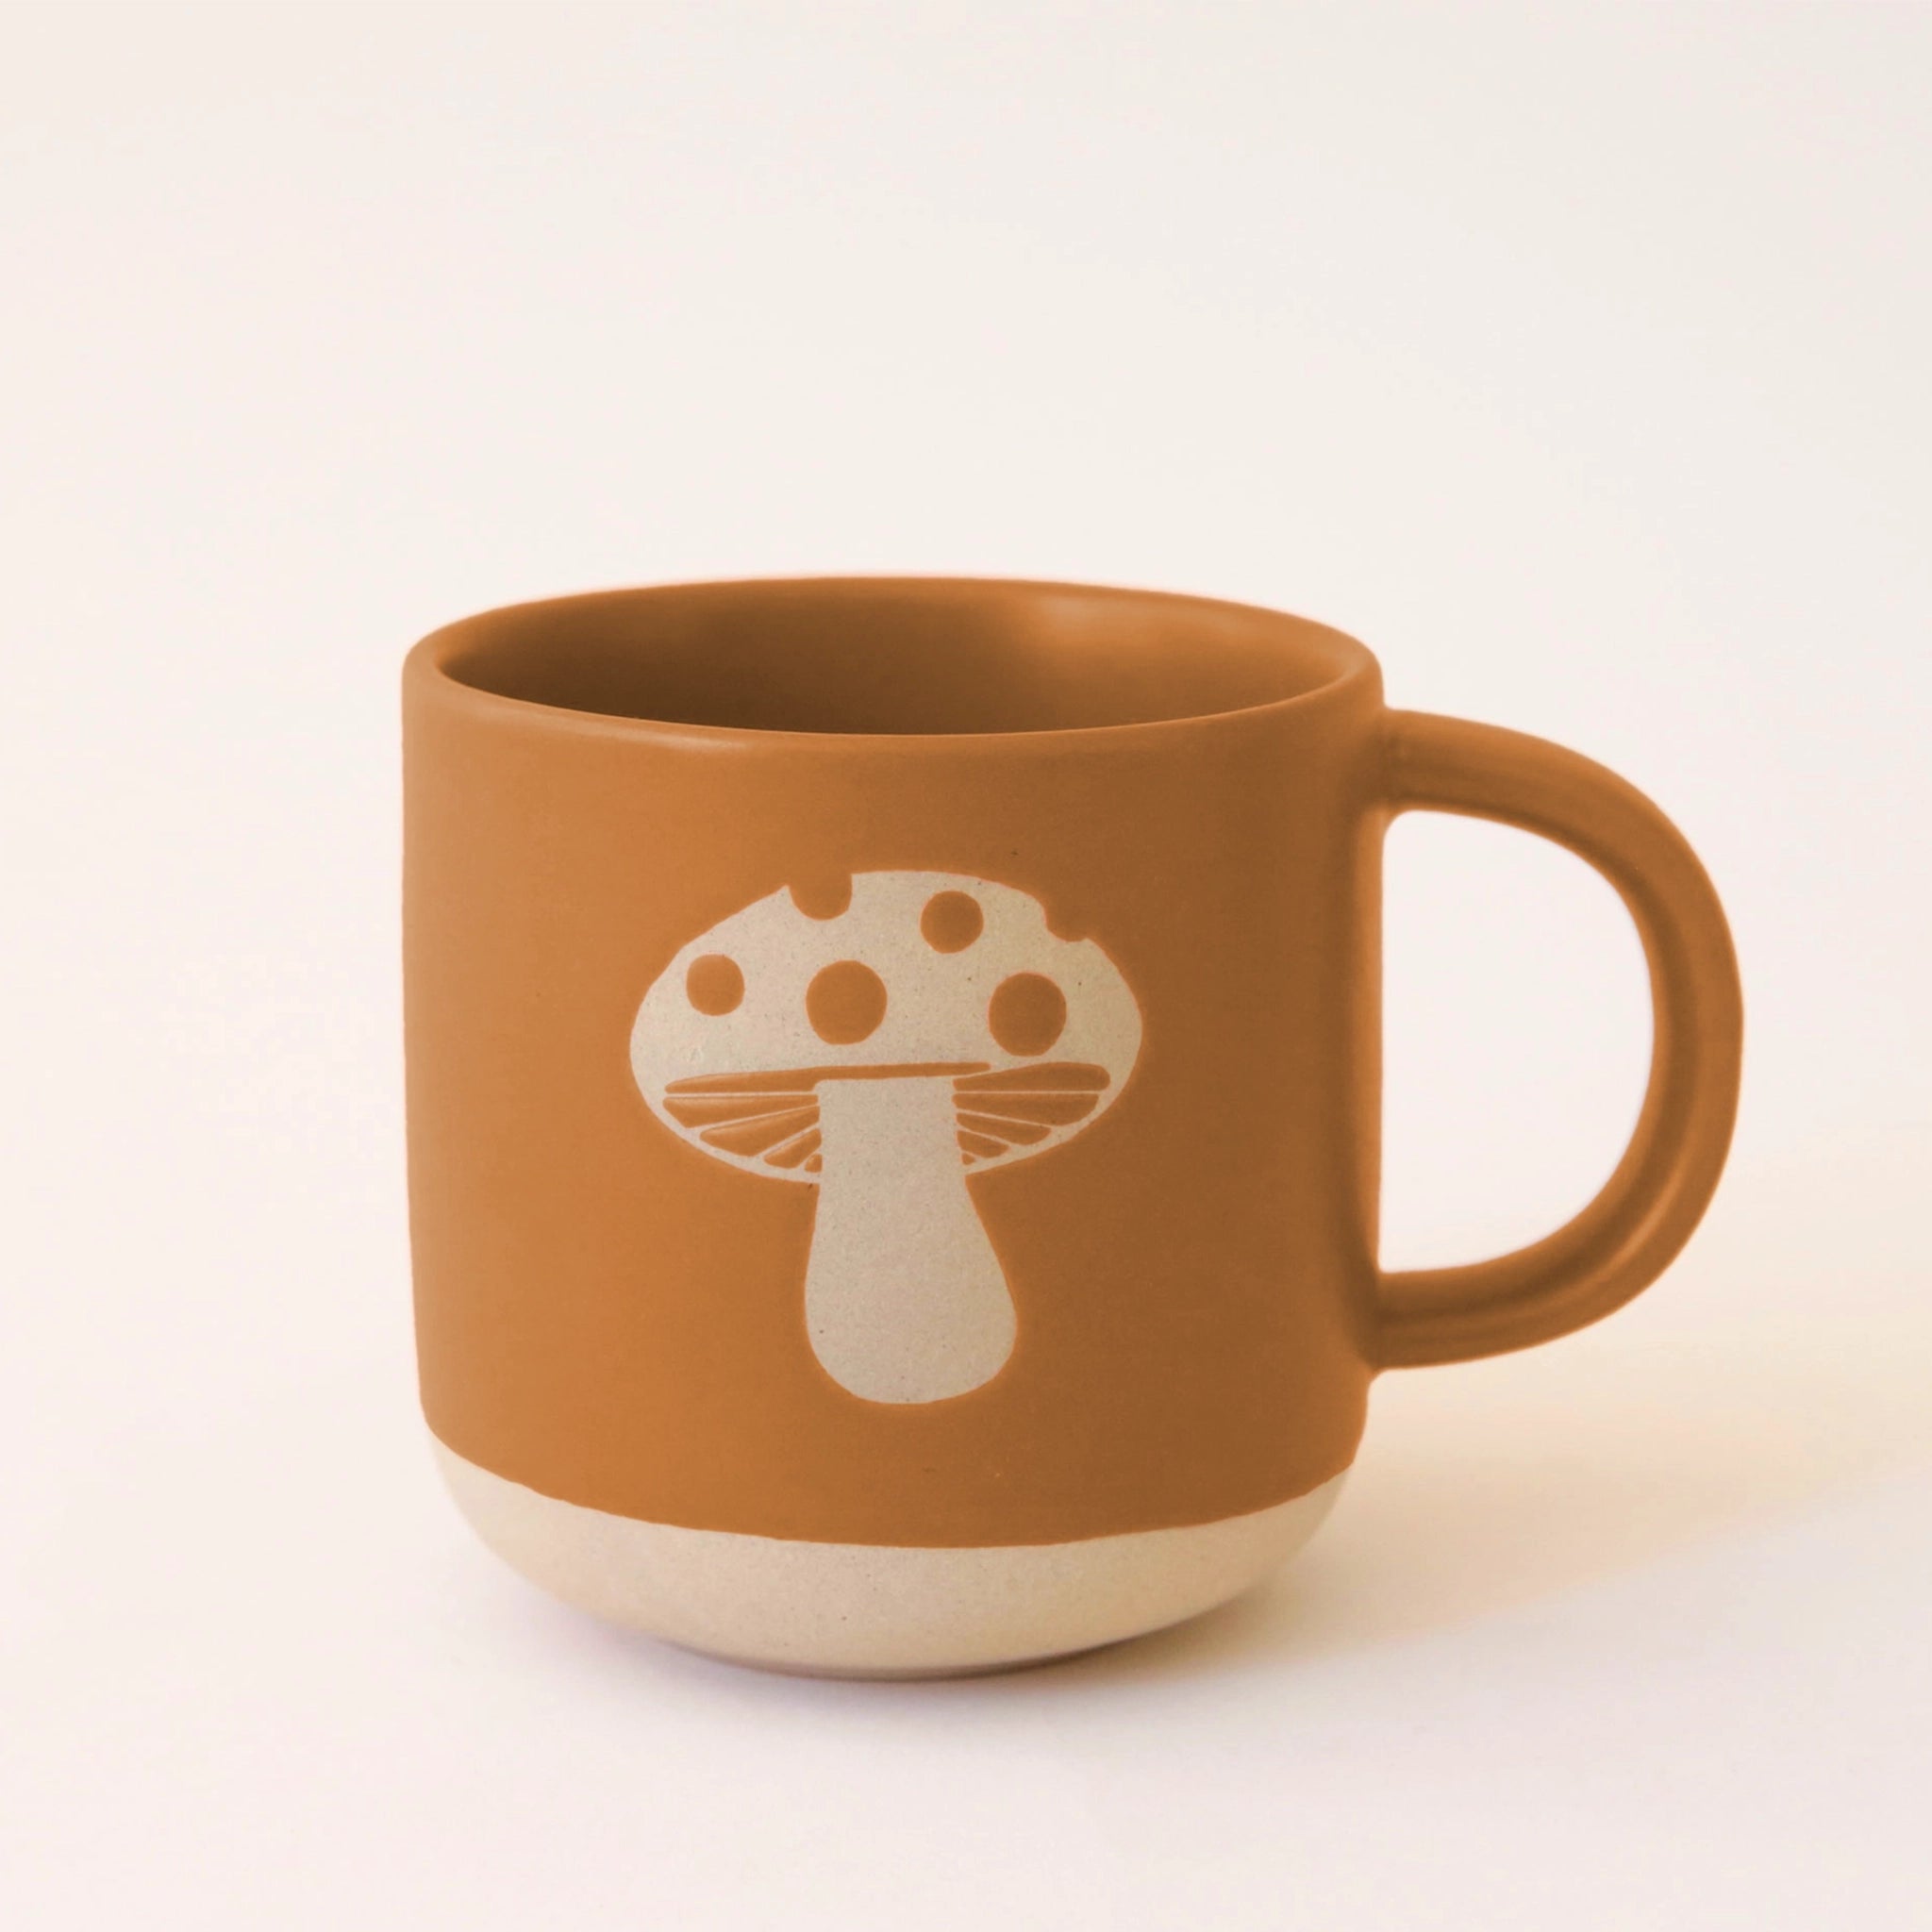 A ceramic mug with a warm brown tone with a mushroom design in the center. 